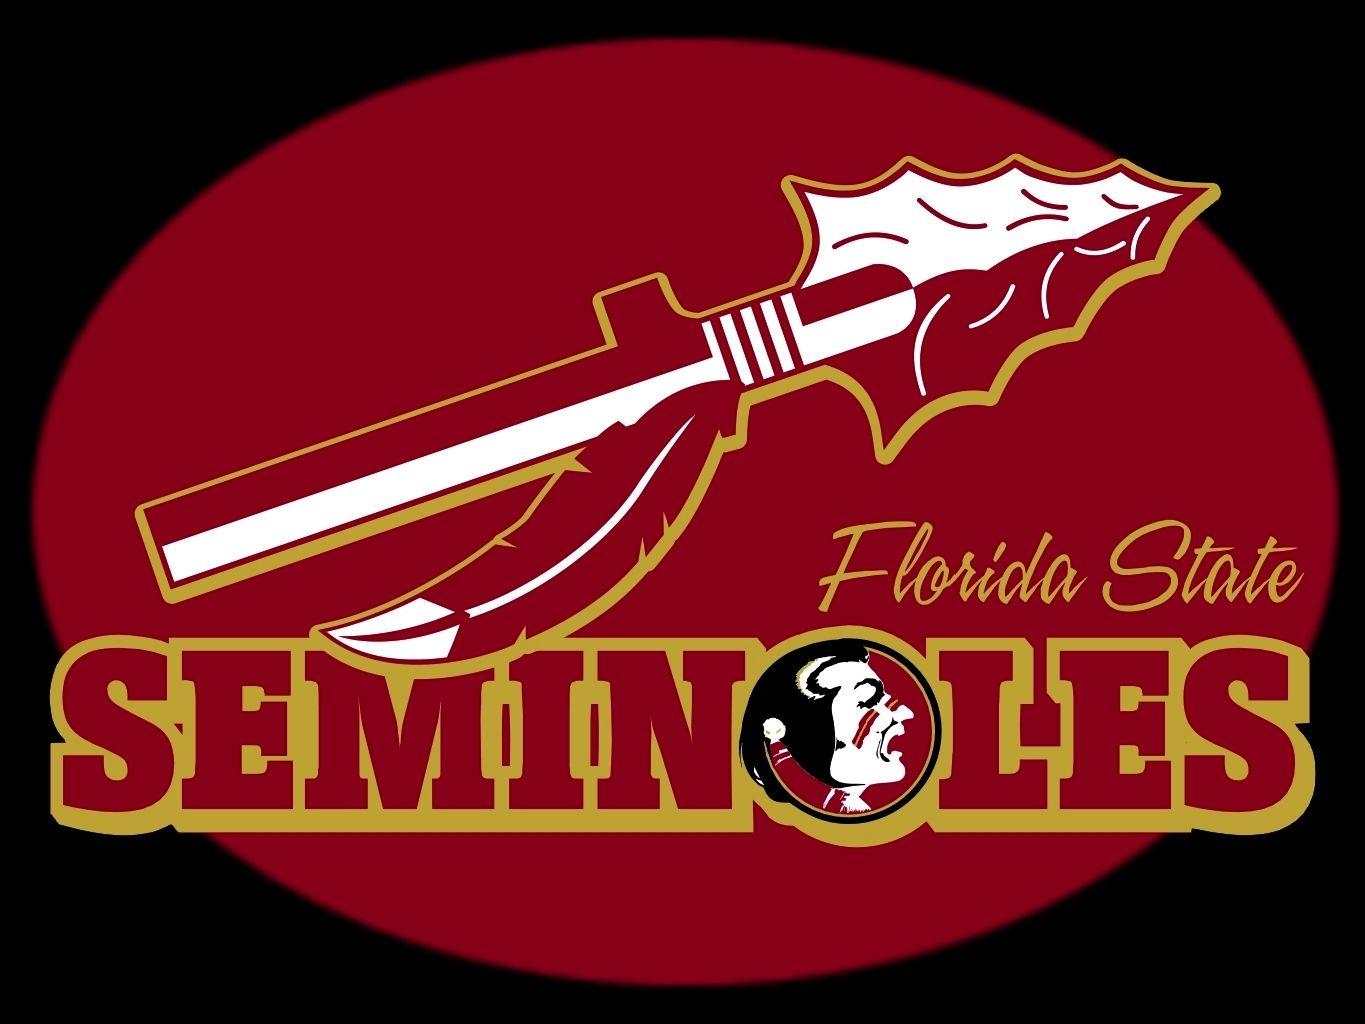 Best image about FLORIDA STATE Seminoles!!!